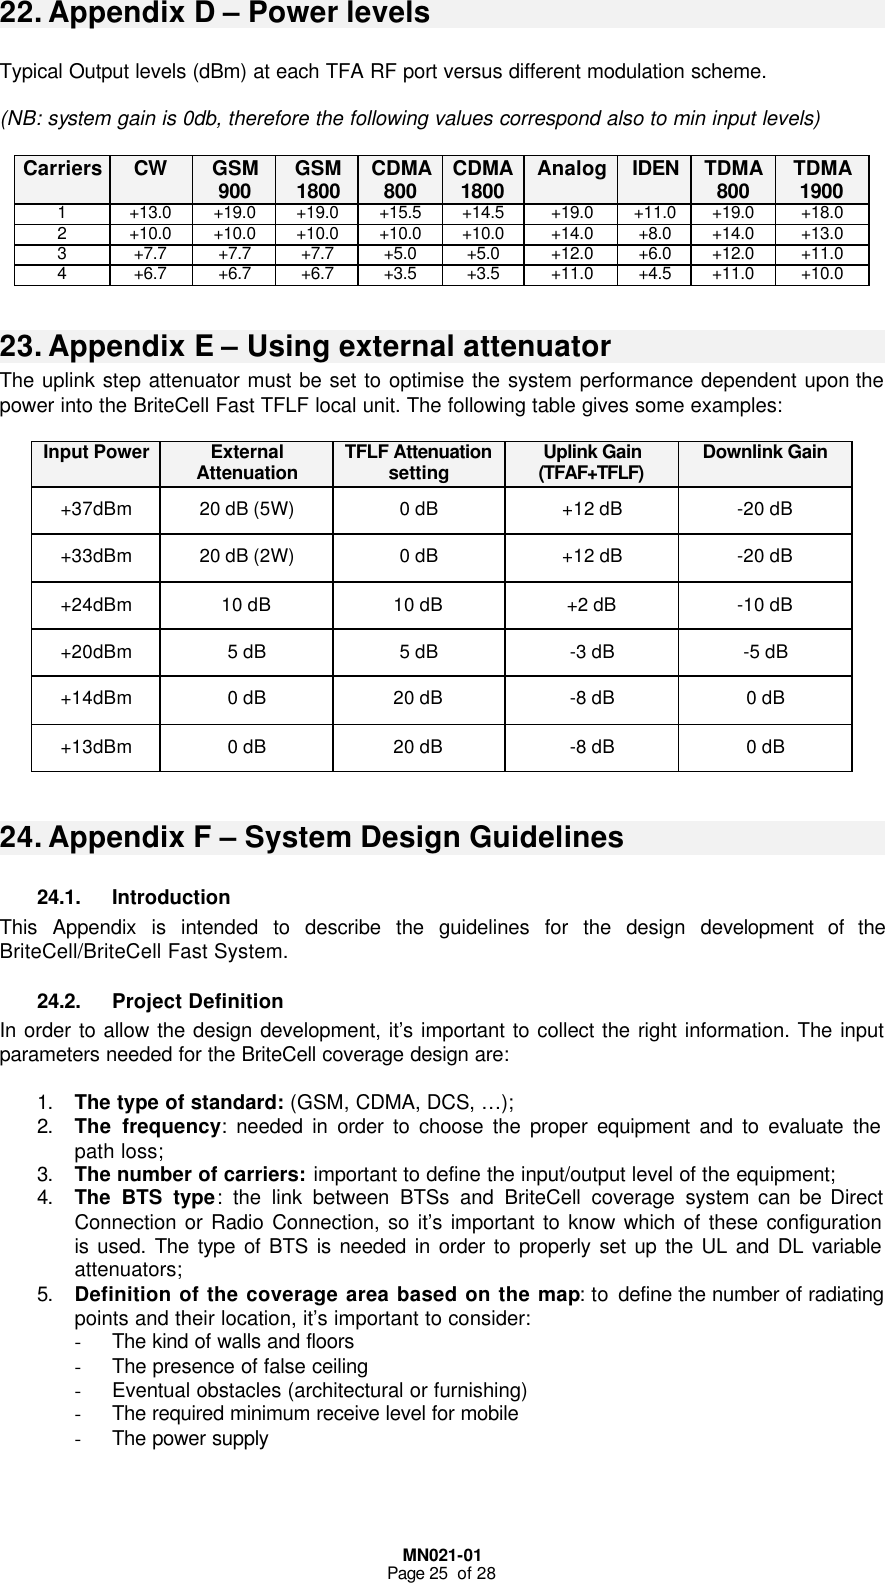  MN021-01 Page 25  of 28 22. Appendix D – Power levels  Typical Output levels (dBm) at each TFA RF port versus different modulation scheme.  (NB: system gain is 0db, therefore the following values correspond also to min input levels)  Carriers CW GSM 900 GSM 1800 CDMA 800 CDMA 1800 Analog IDEN TDMA 800 TDMA 1900 1 +13.0 +19.0 +19.0 +15.5 +14.5 +19.0 +11.0 +19.0 +18.0 2 +10.0 +10.0 +10.0 +10.0 +10.0 +14.0 +8.0 +14.0 +13.0 3 +7.7 +7.7 +7.7 +5.0 +5.0 +12.0 +6.0 +12.0 +11.0 4 +6.7 +6.7 +6.7 +3.5 +3.5 +11.0 +4.5 +11.0 +10.0    23. Appendix E – Using external attenuator  The uplink step attenuator must be set to optimise the system performance dependent upon the power into the BriteCell Fast TFLF local unit. The following table gives some examples:  Input Power External Attenuation TFLF Attenuation setting Uplink Gain (TFAF+TFLF) Downlink Gain +37dBm 20 dB (5W) 0 dB +12 dB -20 dB +33dBm 20 dB (2W) 0 dB +12 dB -20 dB +24dBm 10 dB 10 dB +2 dB -10 dB +20dBm 5 dB 5 dB -3 dB -5 dB +14dBm 0 dB 20 dB -8 dB 0 dB +13dBm 0 dB 20 dB -8 dB 0 dB  24. Appendix F – System Design Guidelines 24.1. Introduction This Appendix is intended to describe the guidelines for the design development of the BriteCell/BriteCell Fast System. 24.2. Project Definition In order to allow the design development, it’s important to collect the right information. The input parameters needed for the BriteCell coverage design are:  1. The type of standard: (GSM, CDMA, DCS, …); 2. The frequency: needed in order to choose the proper equipment and to evaluate the path loss; 3. The number of carriers: important to define the input/output level of the equipment; 4. The BTS type: the link between BTSs and BriteCell coverage system can be Direct Connection or Radio Connection, so it’s important to know which of these configuration is used. The type of BTS is needed in order to properly set up the UL and DL variable attenuators; 5. Definition of the coverage area based on the map: to define the number of radiating points and their location, it’s important to consider: - The kind of walls and floors - The presence of false ceiling - Eventual obstacles (architectural or furnishing) - The required minimum receive level for mobile  - The power supply 